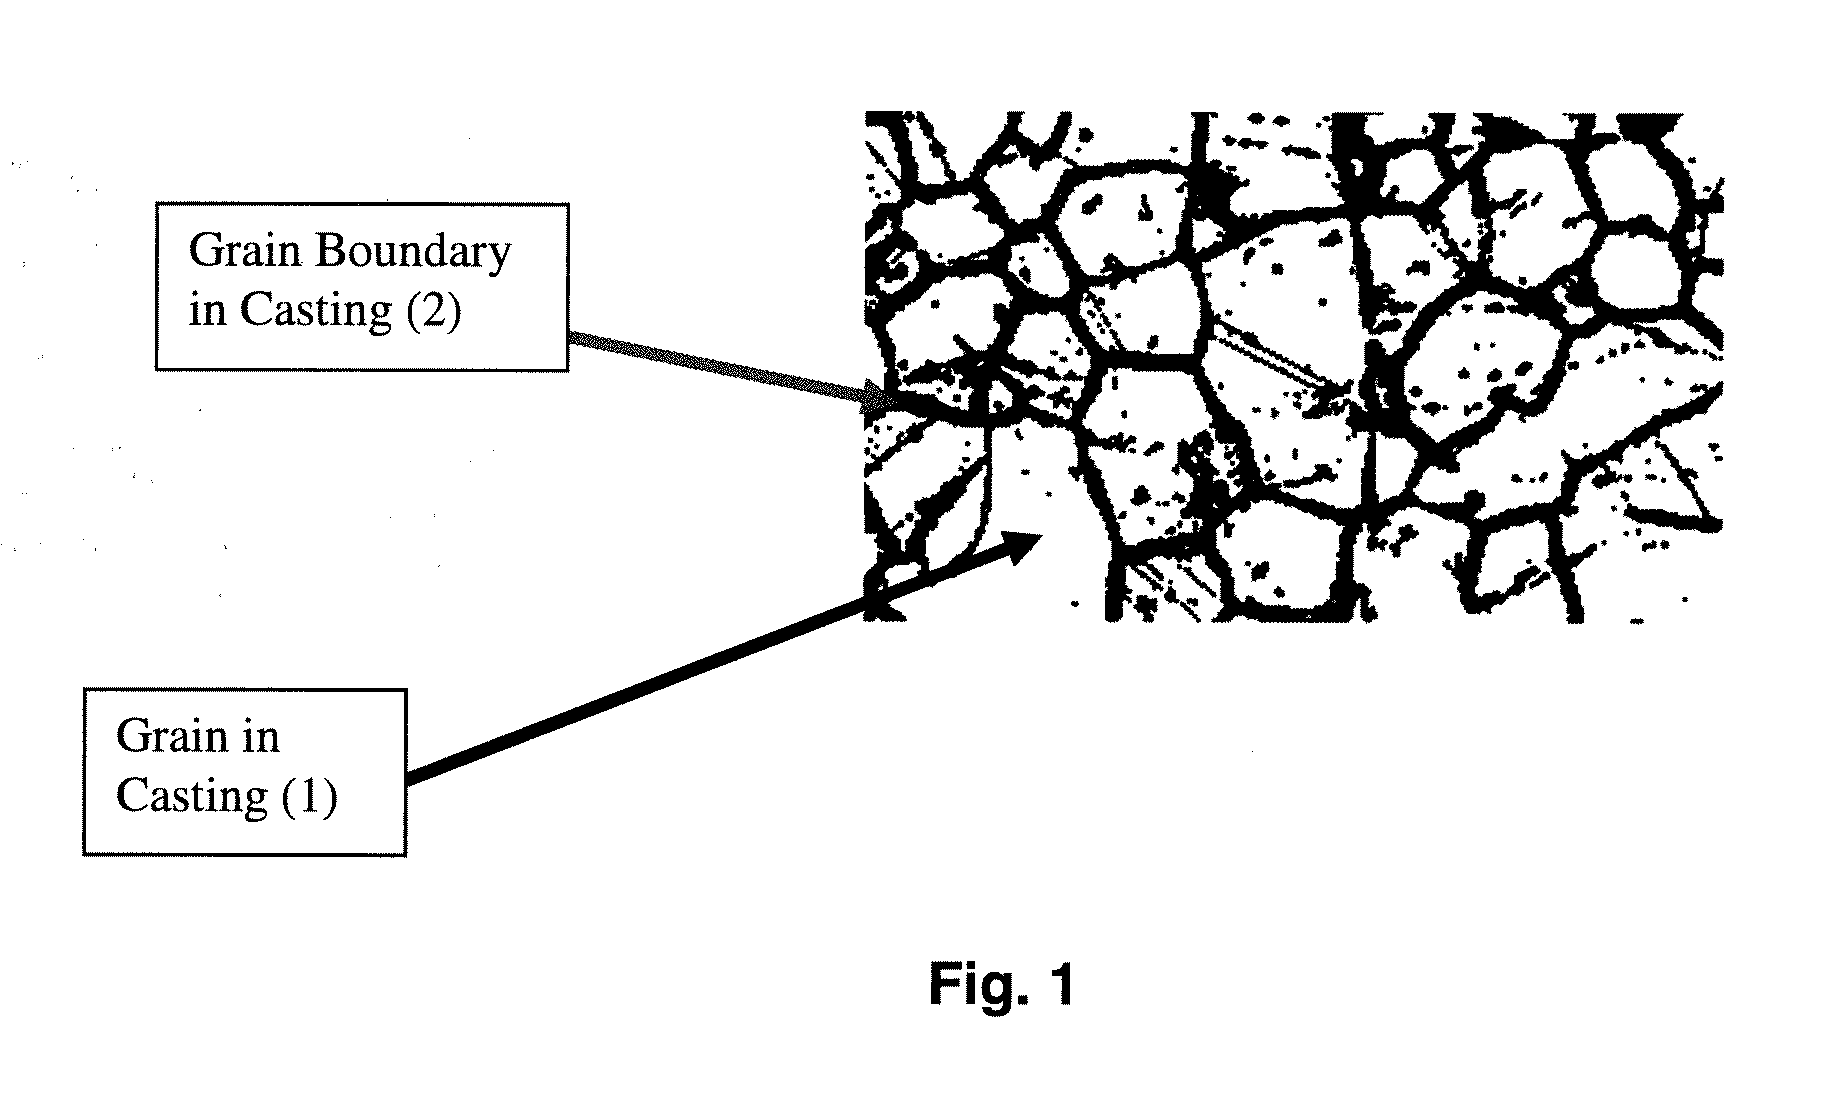 Manufacture of Controlled Rate Dissolving Materials